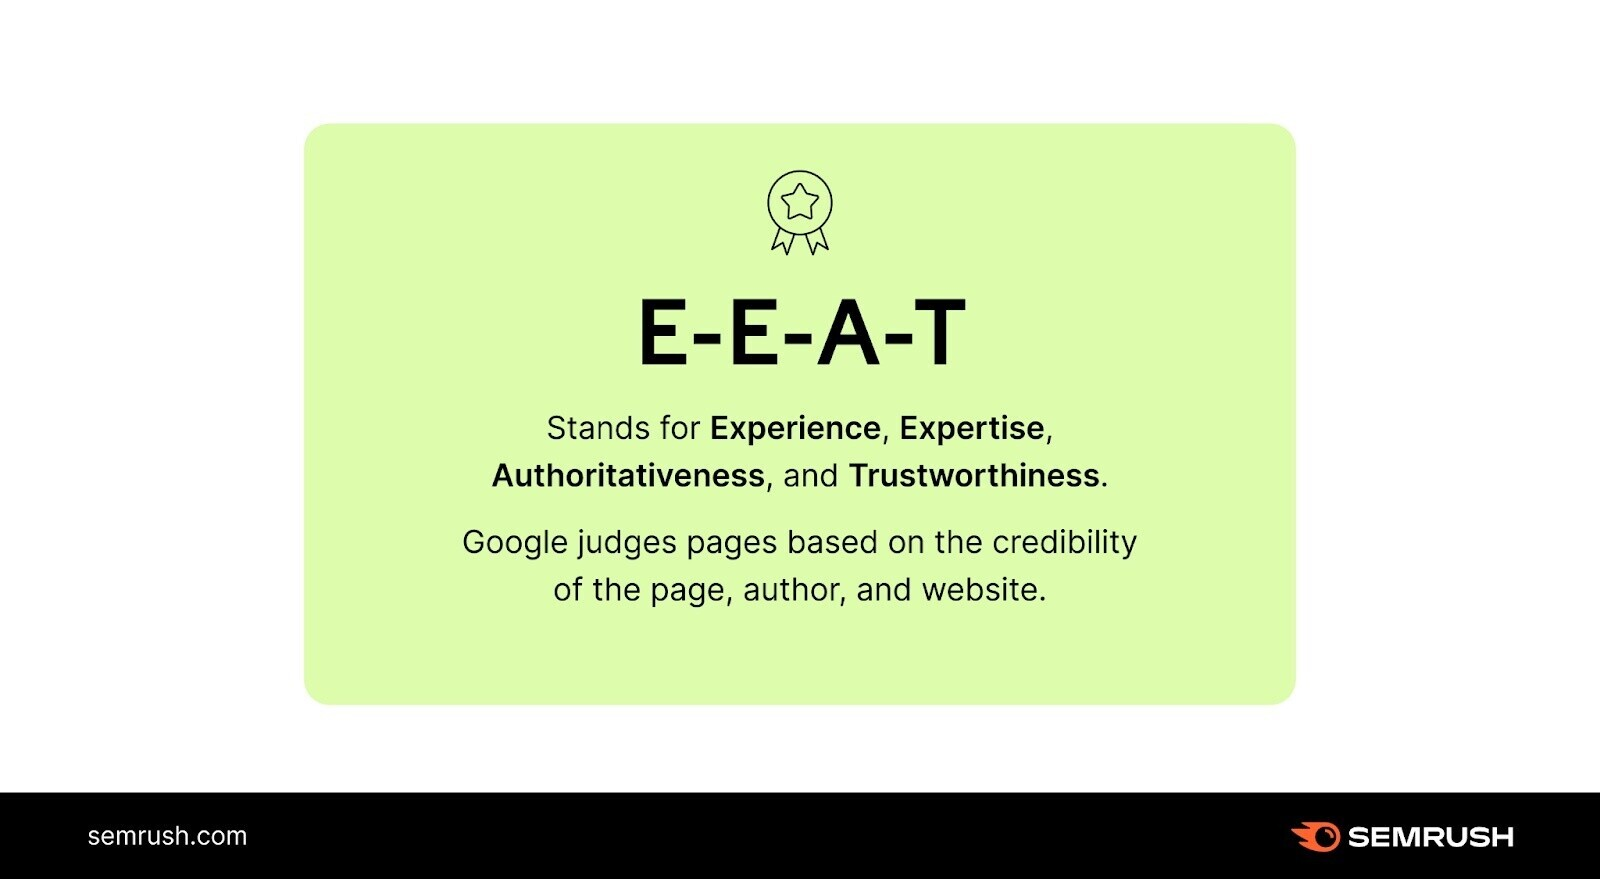  Google judges pages based connected  the credibility of the page, author, and website